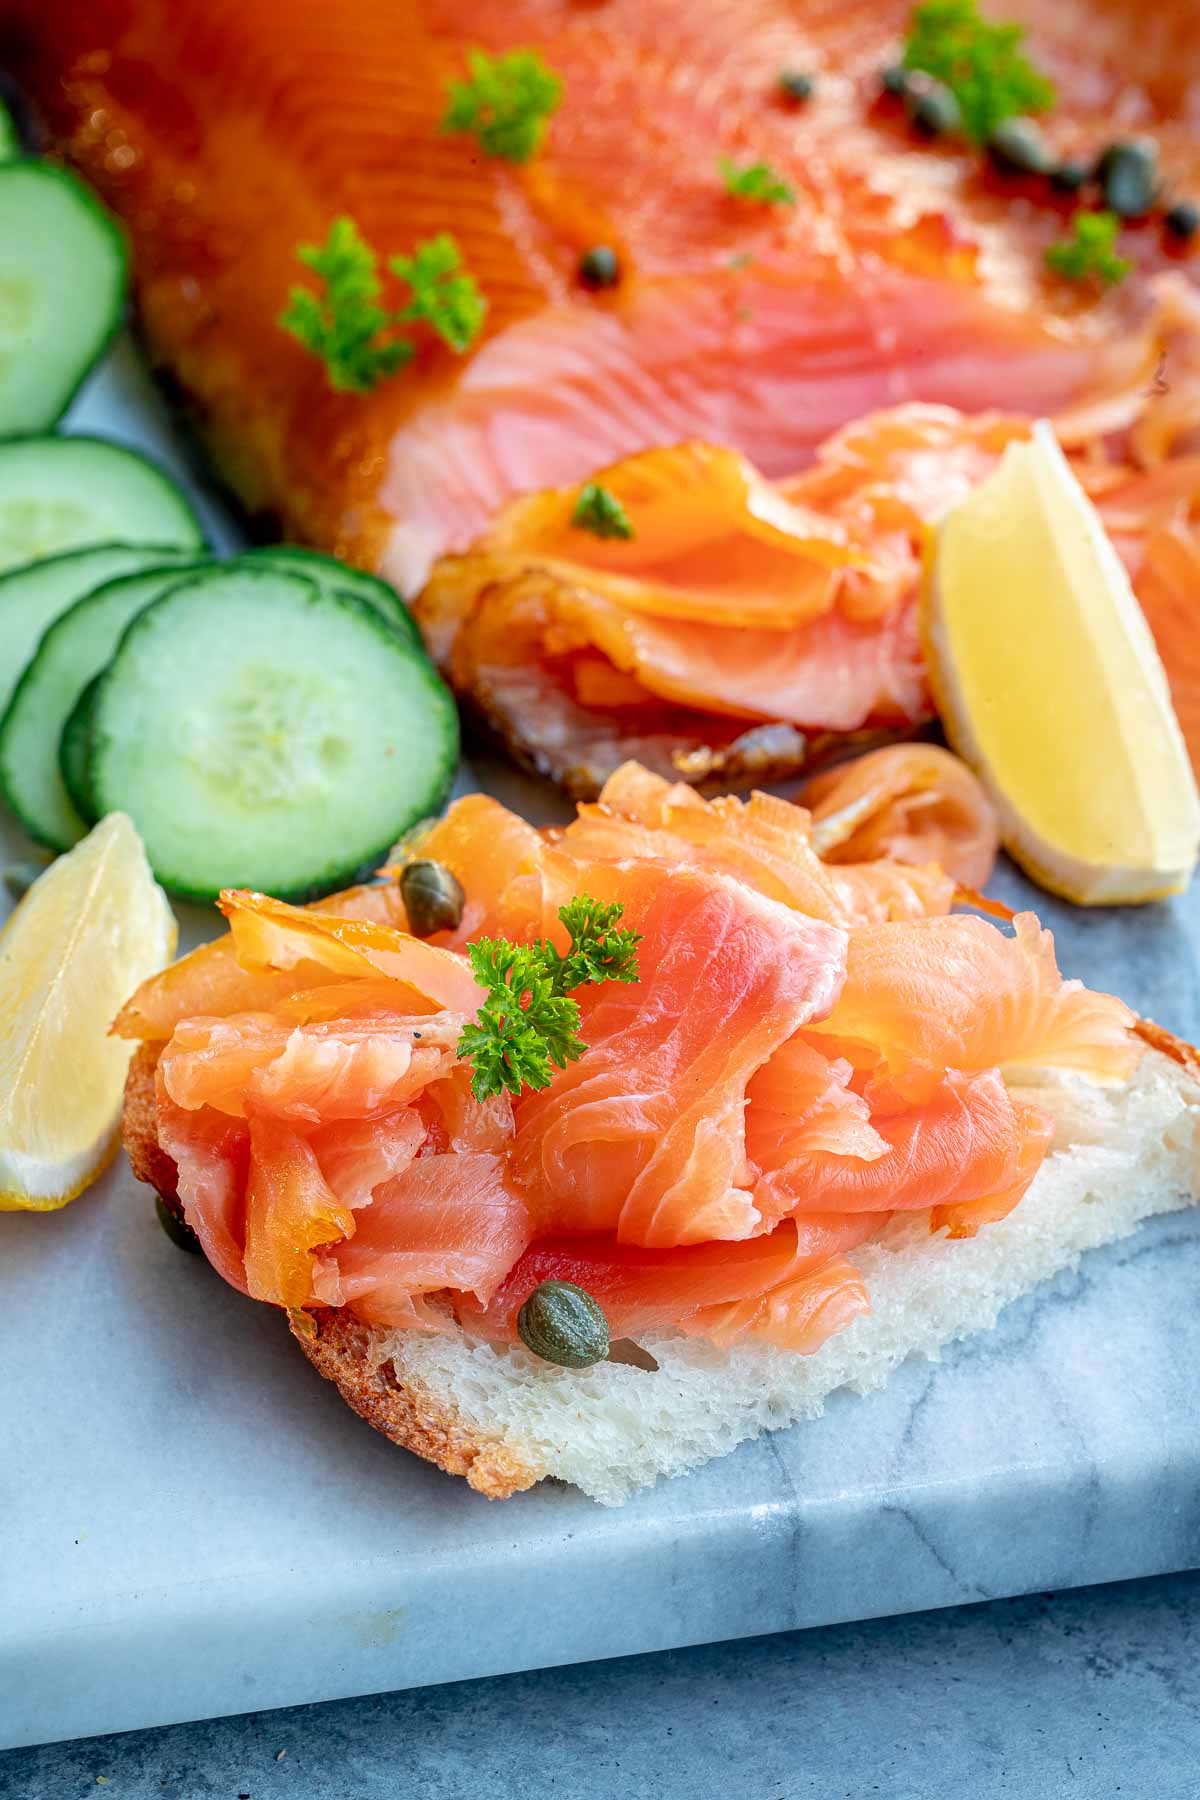 Cold Smoked Salmon Recipe - Let the Baking Begin!